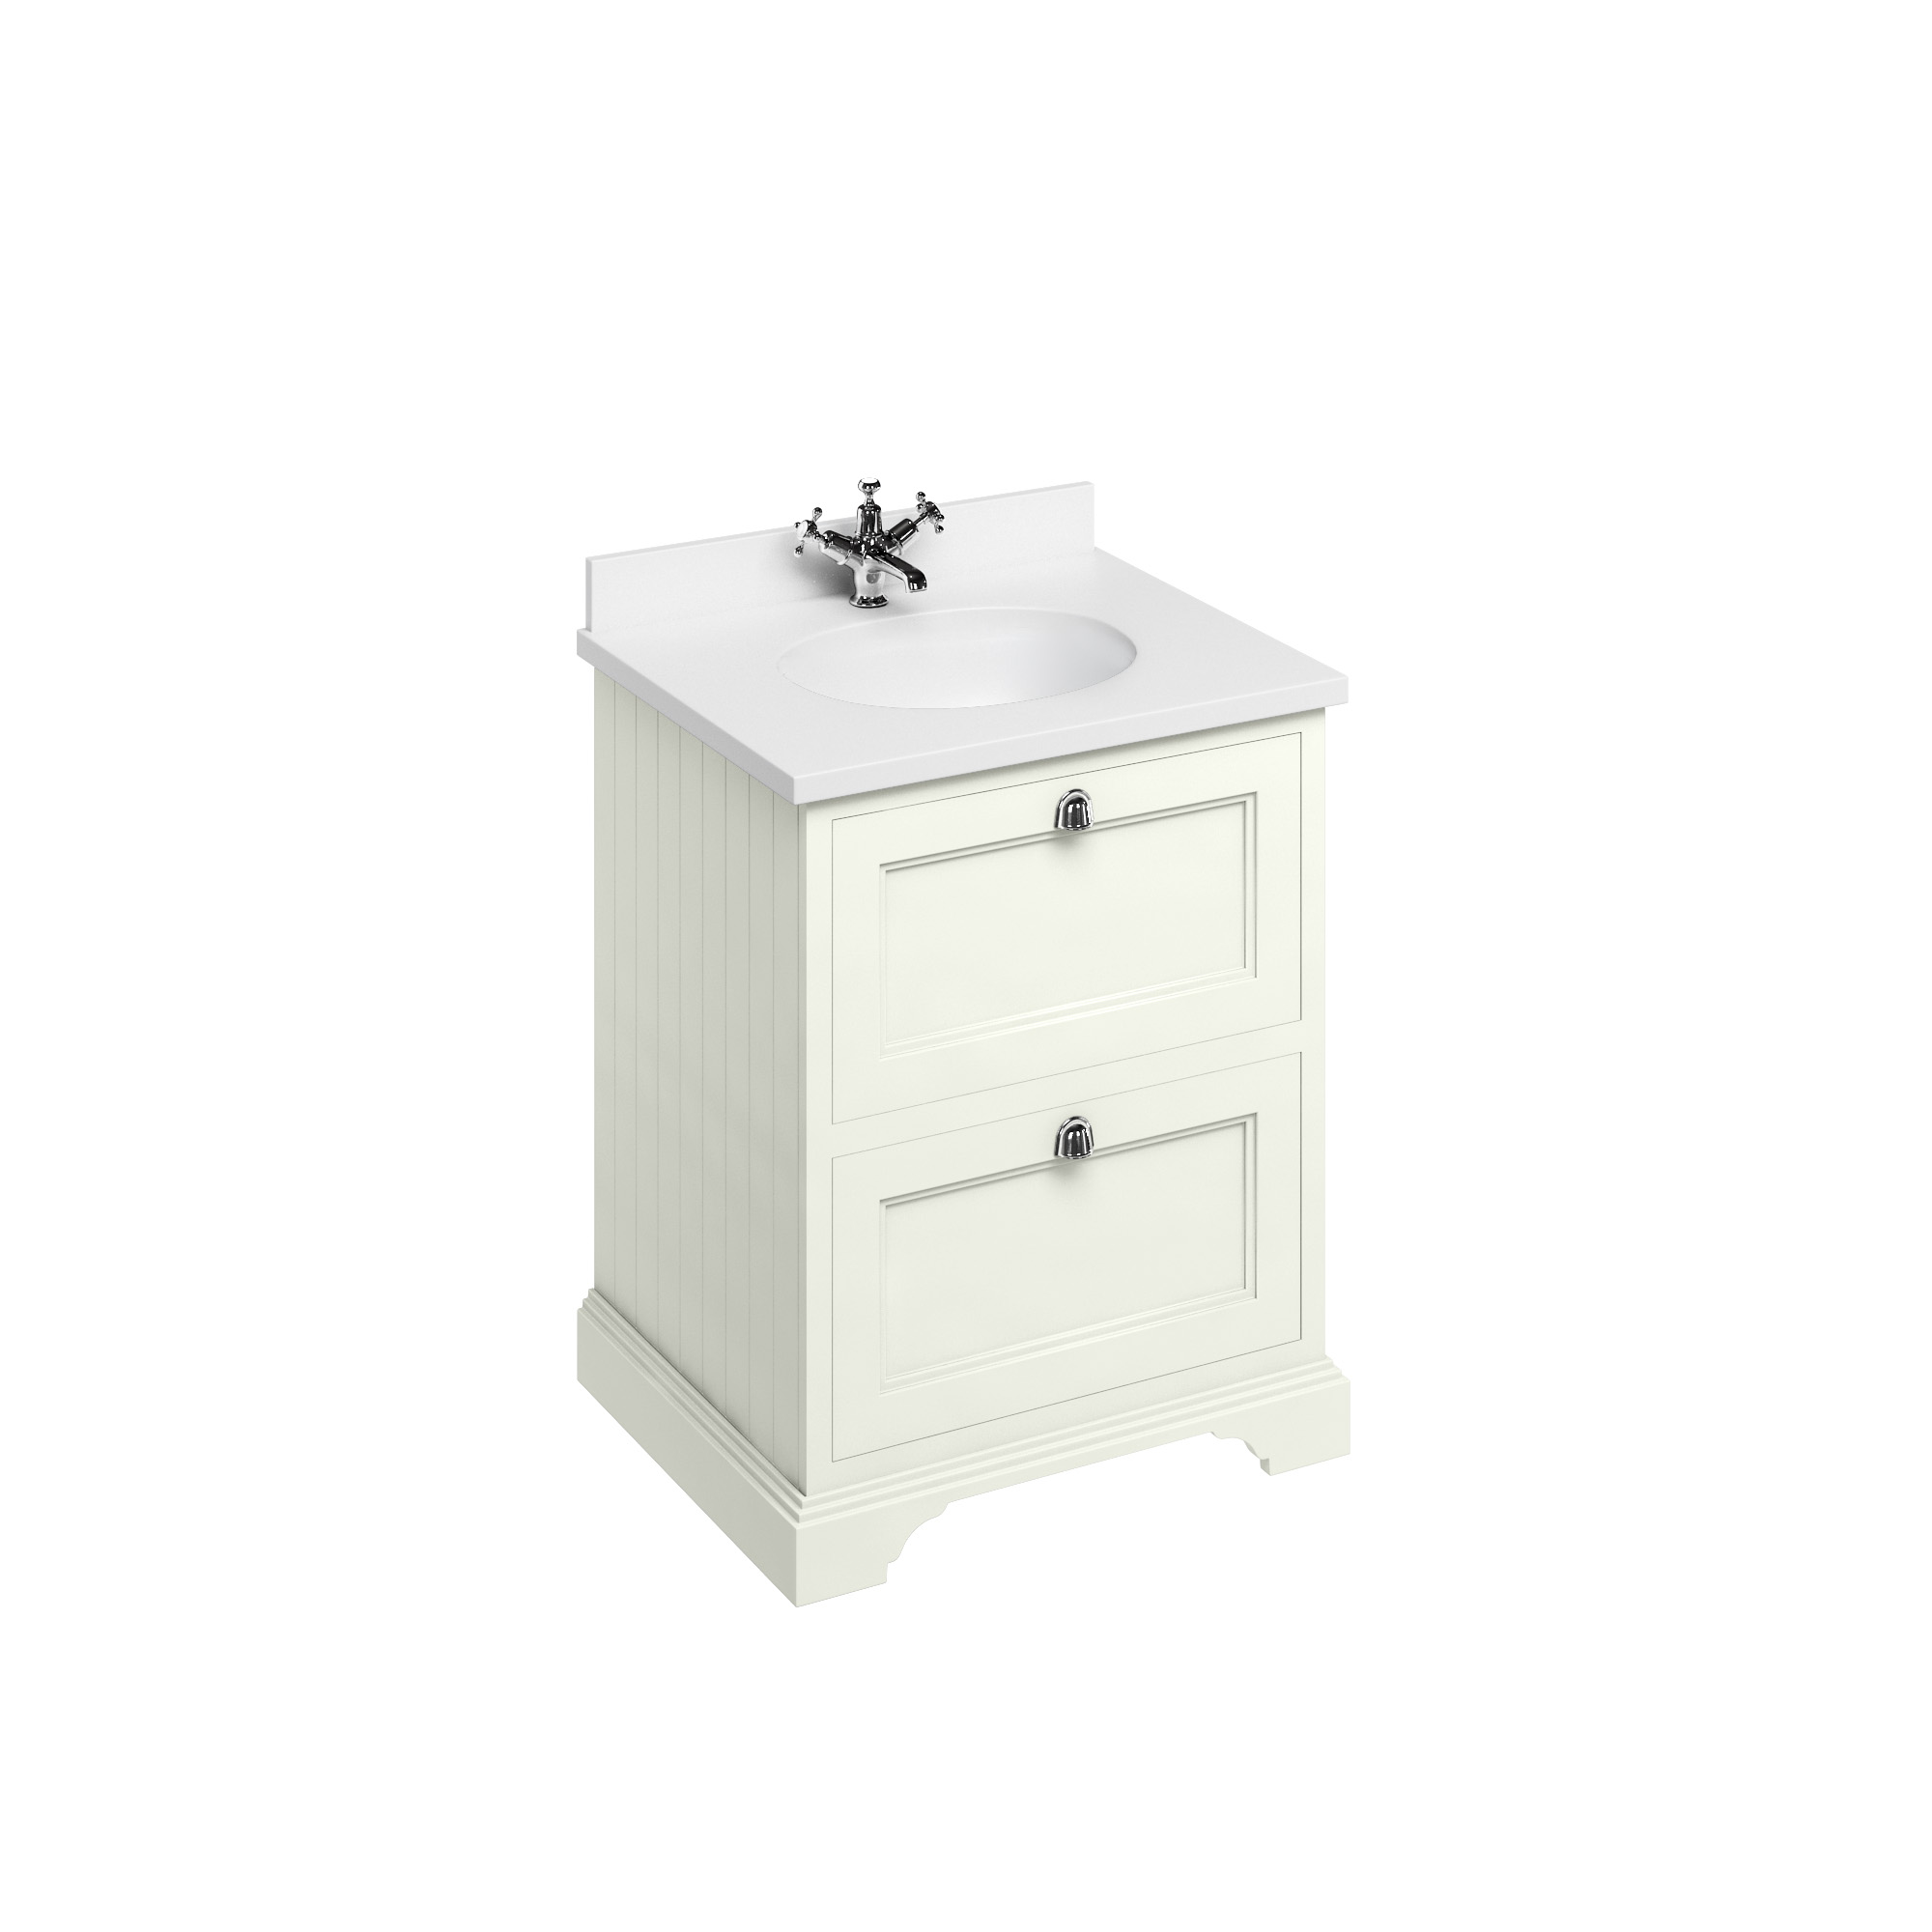 Freestanding 65 Vanity Unit with 2 drawers - Sand and Minerva white worktop with integrated white basin